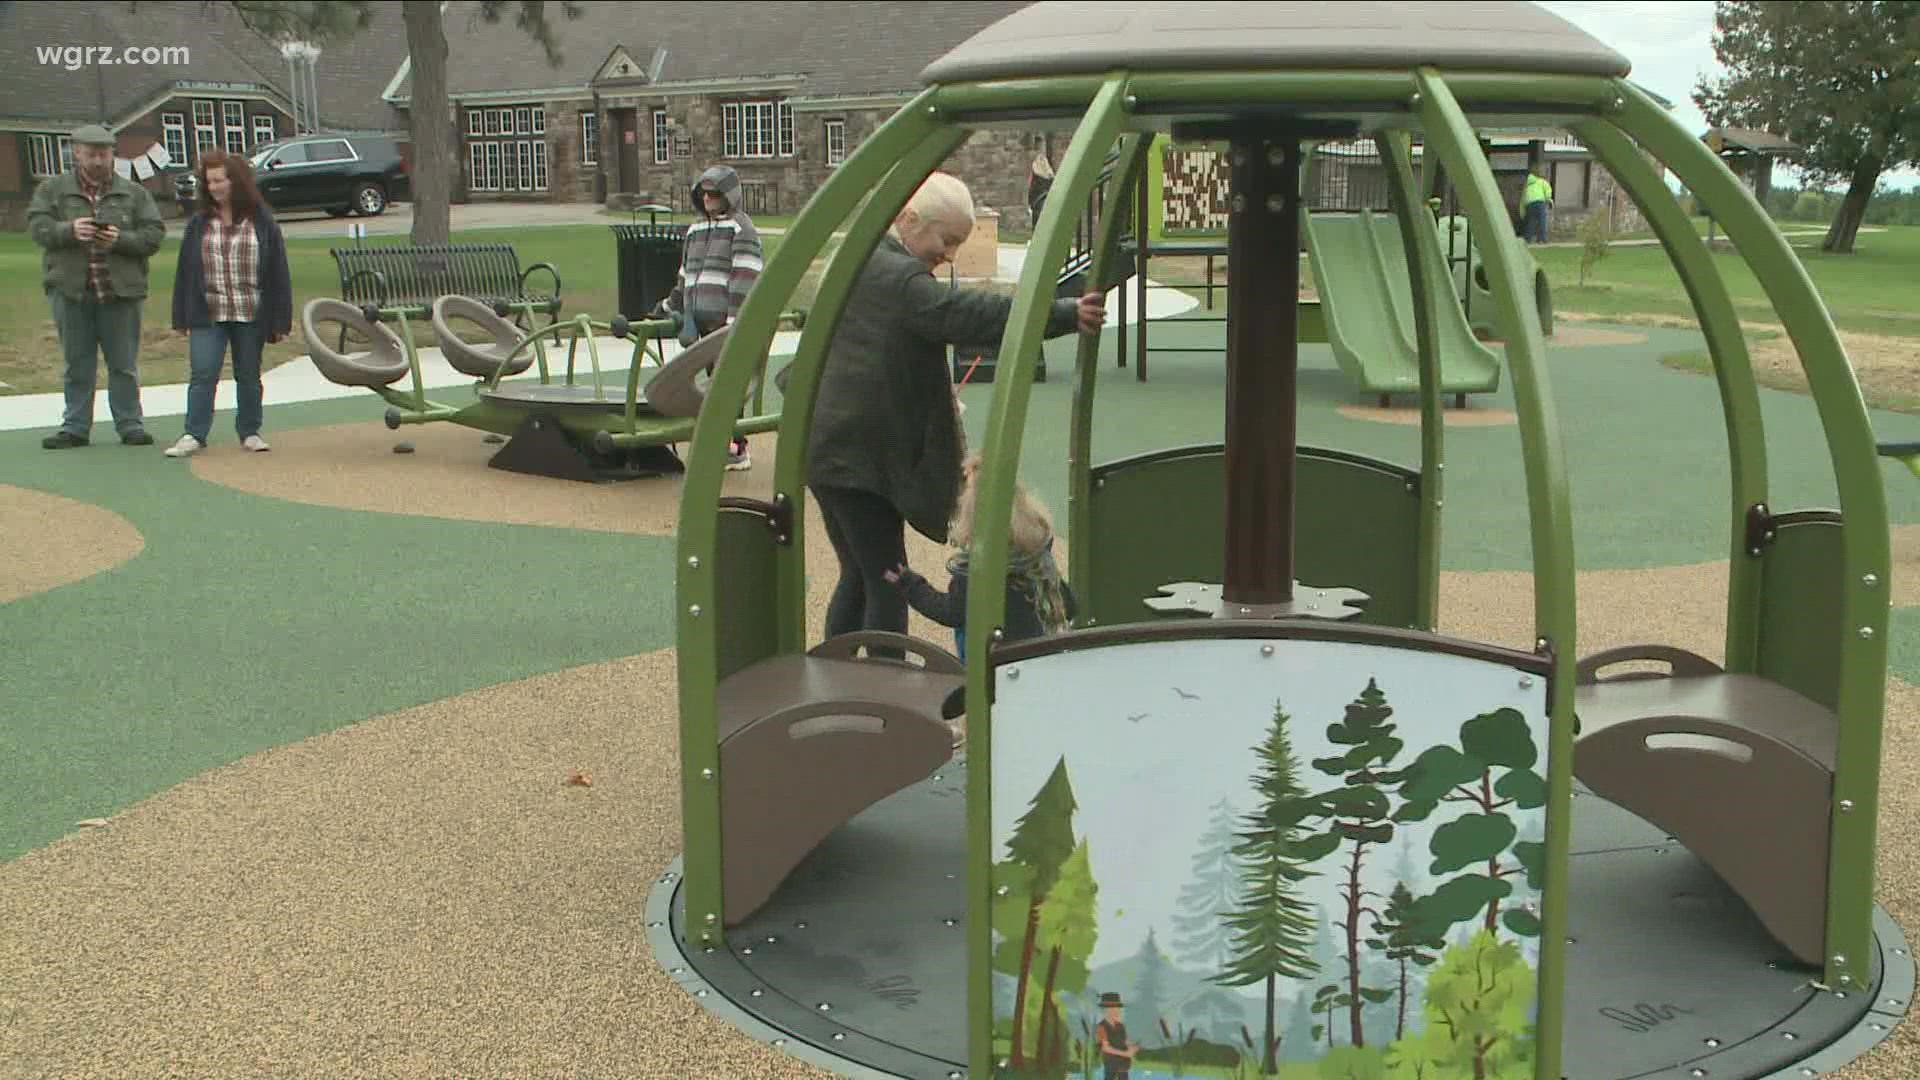 There's a new playground in Orchard Park, which is making sure to share a message about inclusivity.